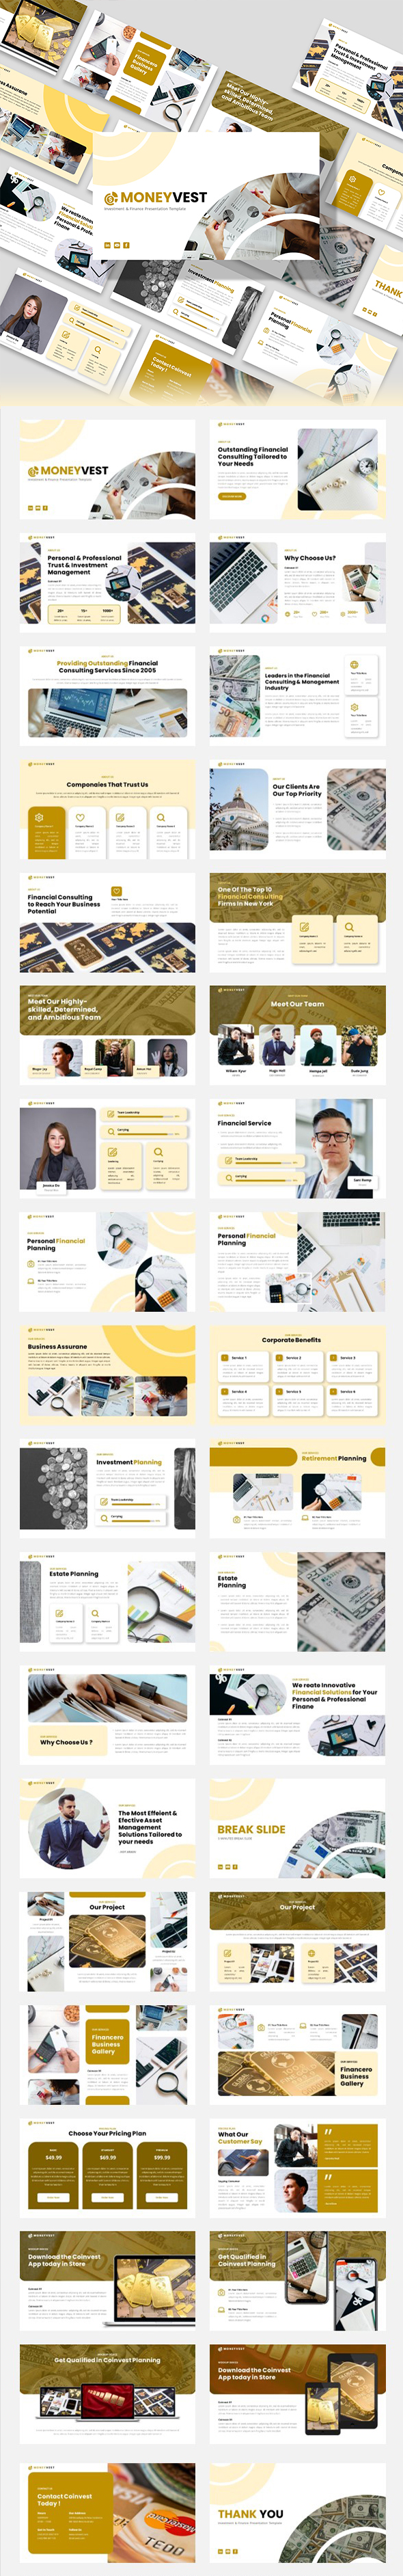 [DOWNLOAD]Moneyvest - Money Management And Investment PowerPoint Template